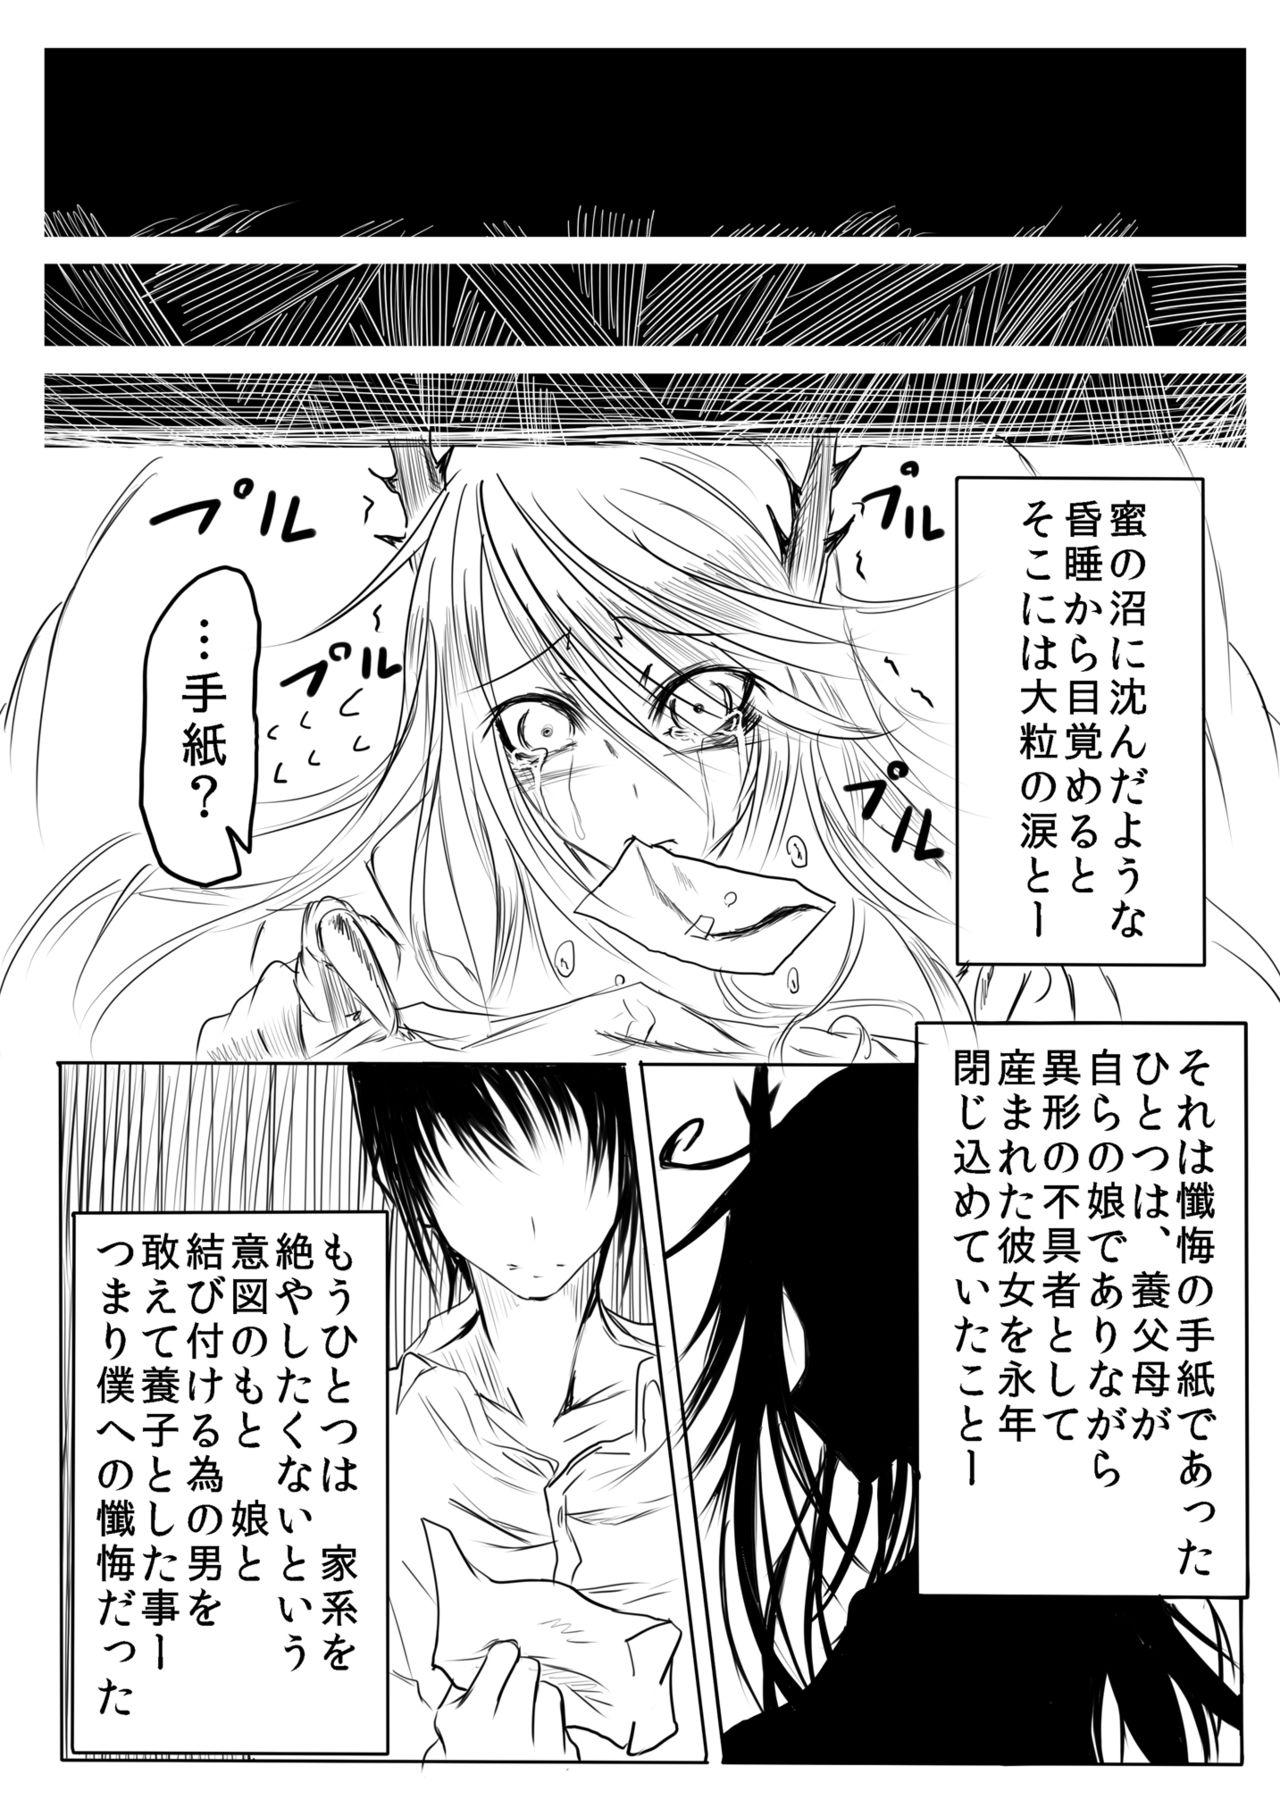 Passivo 妄嬢蟲 Girls Getting Fucked - Page 19